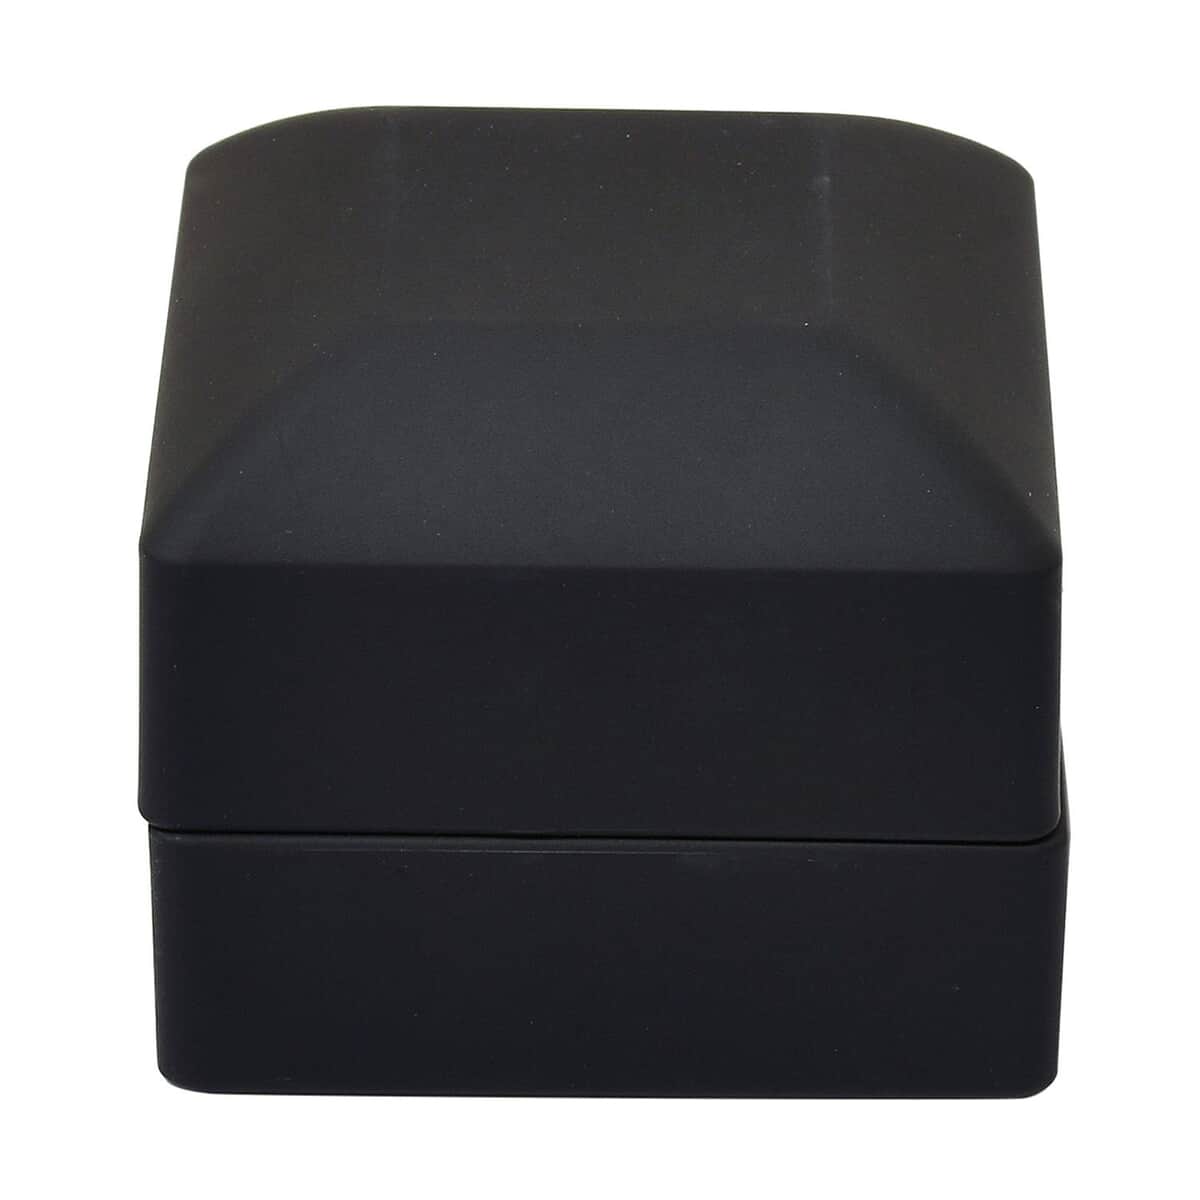 Black Solid Luxurious Polish Ring Jewelry Box with LED Light (Can Hold 1 up to 2 Rings) (2.5"x2.4"x2") image number 0